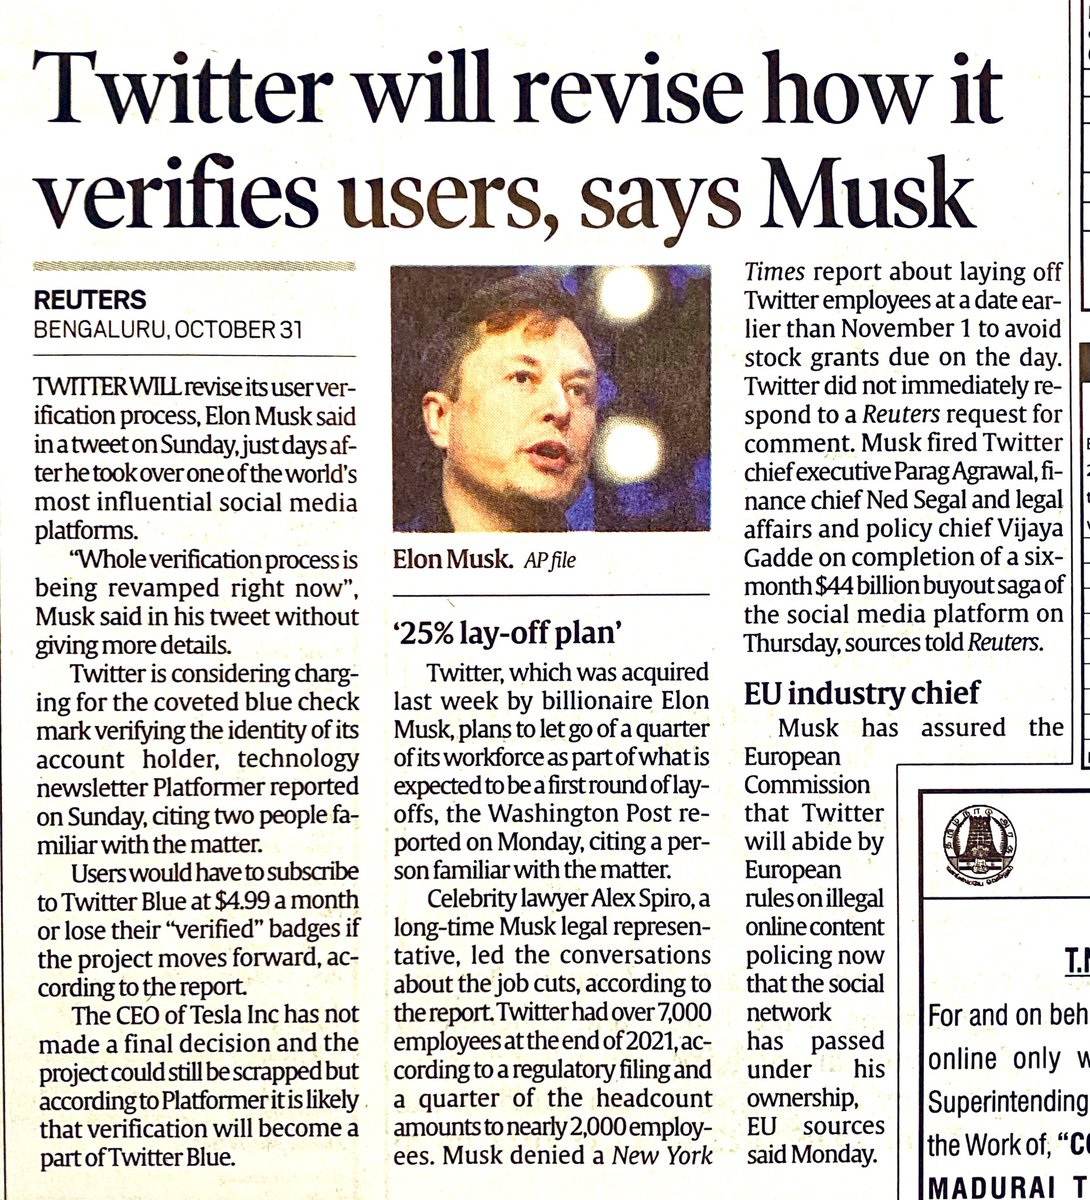 @ReallySwara @Twitter @paritoshZero @PritishNandy @AnantRangaswami @BDUTT @fayedsouza @shunalishroff @iamsonalibendre @nikkhiladvani @Apurvasrani This is a good move…in fact, to further help the cause of ‘free speech absolutism’, @elonmusk should delete the anonymous troll accounts and have everyone’s free speech, supportive or critical, and not just the ‘blue ticks’, linked to their legitimate real world identities.